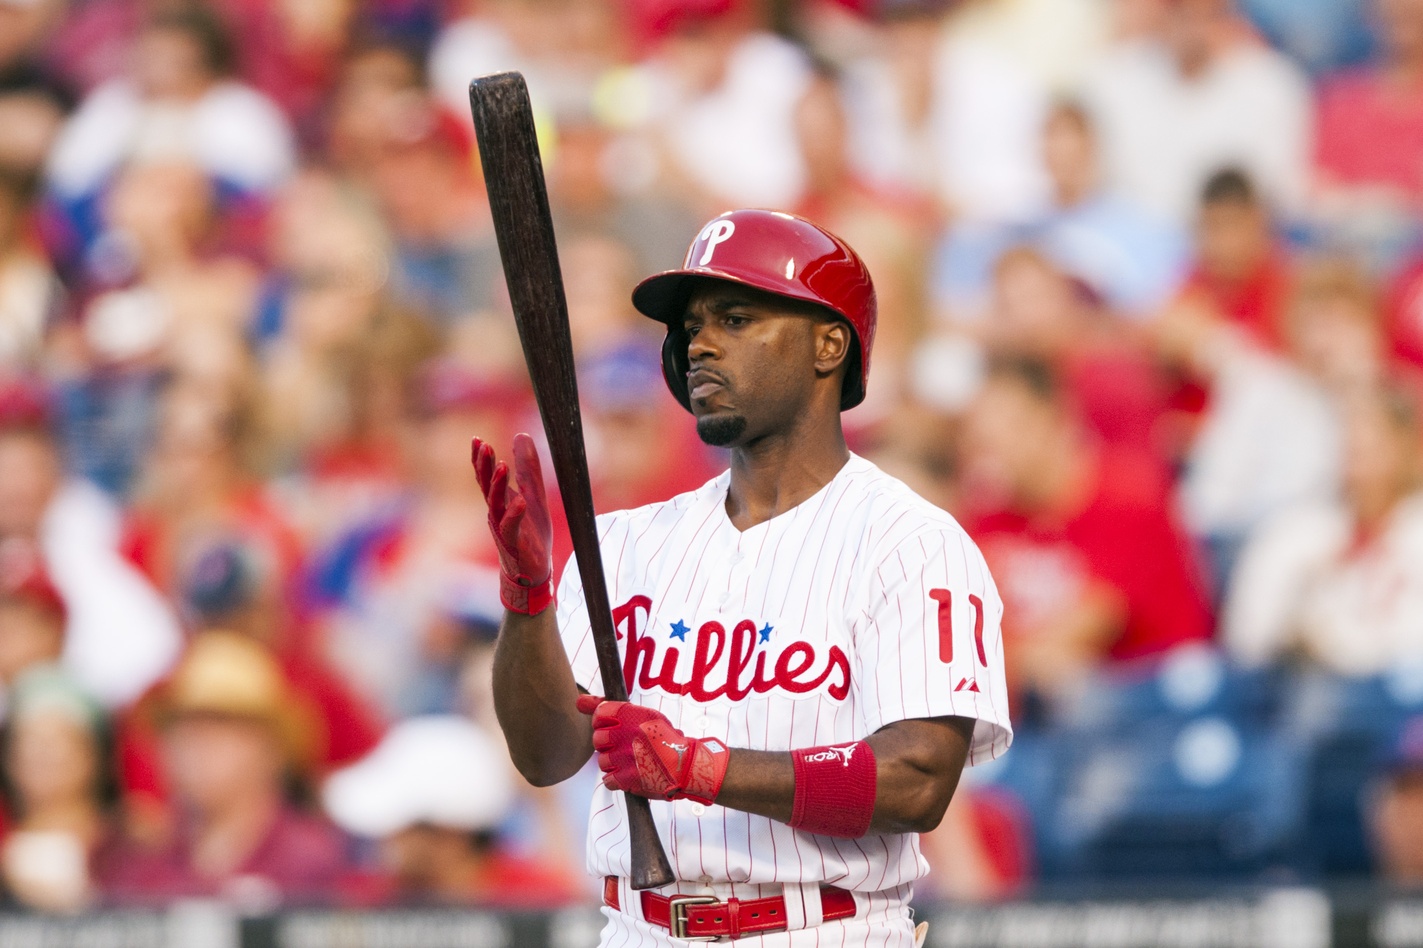 Phillies shortstop Jimmy Rollins (USA TODAY Sports Images)